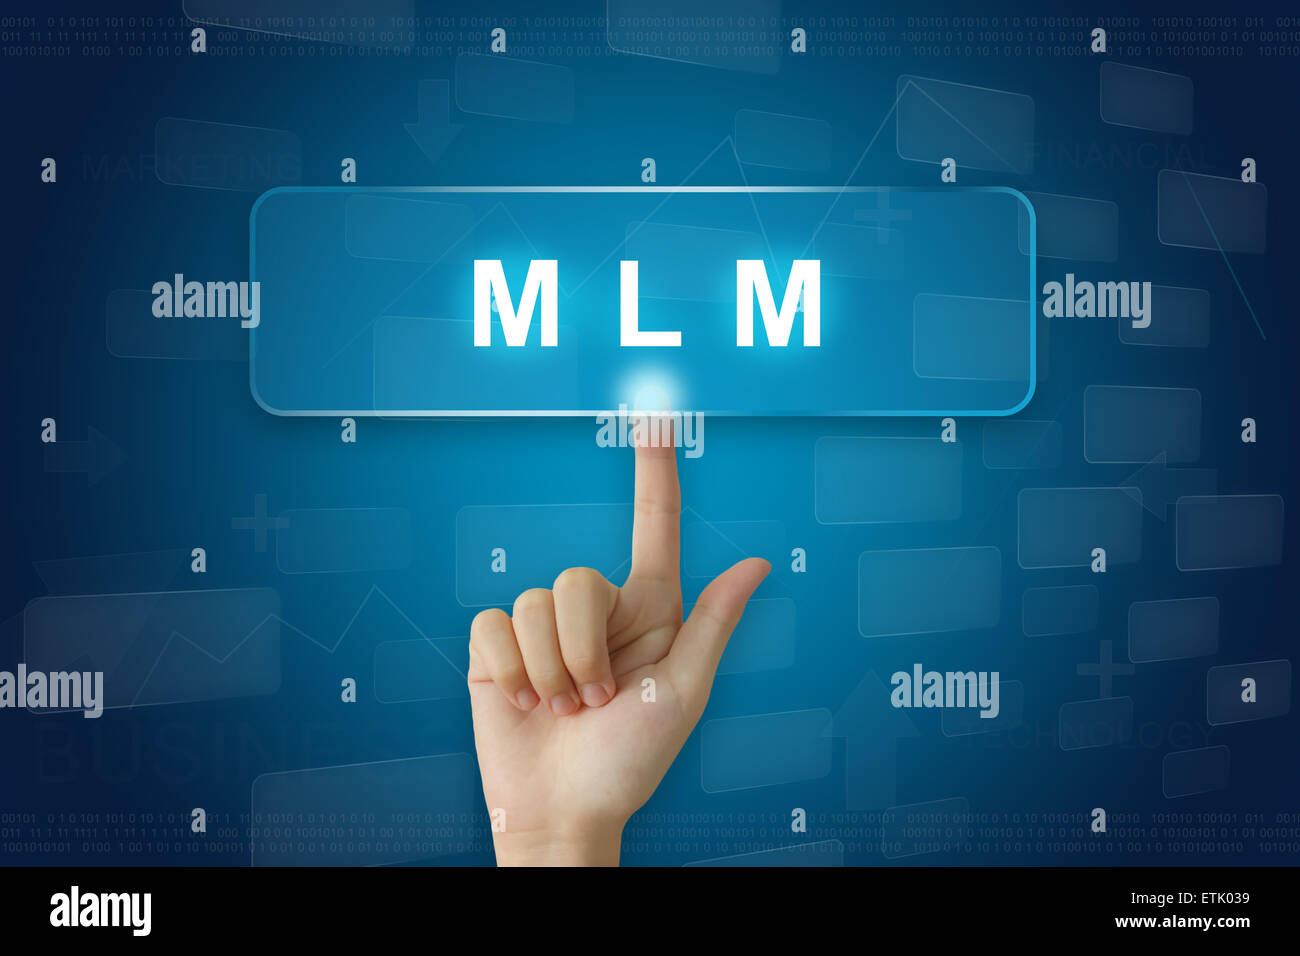 hand press on MLM or Multi Level Marketing button on virtual screen Stock Photo